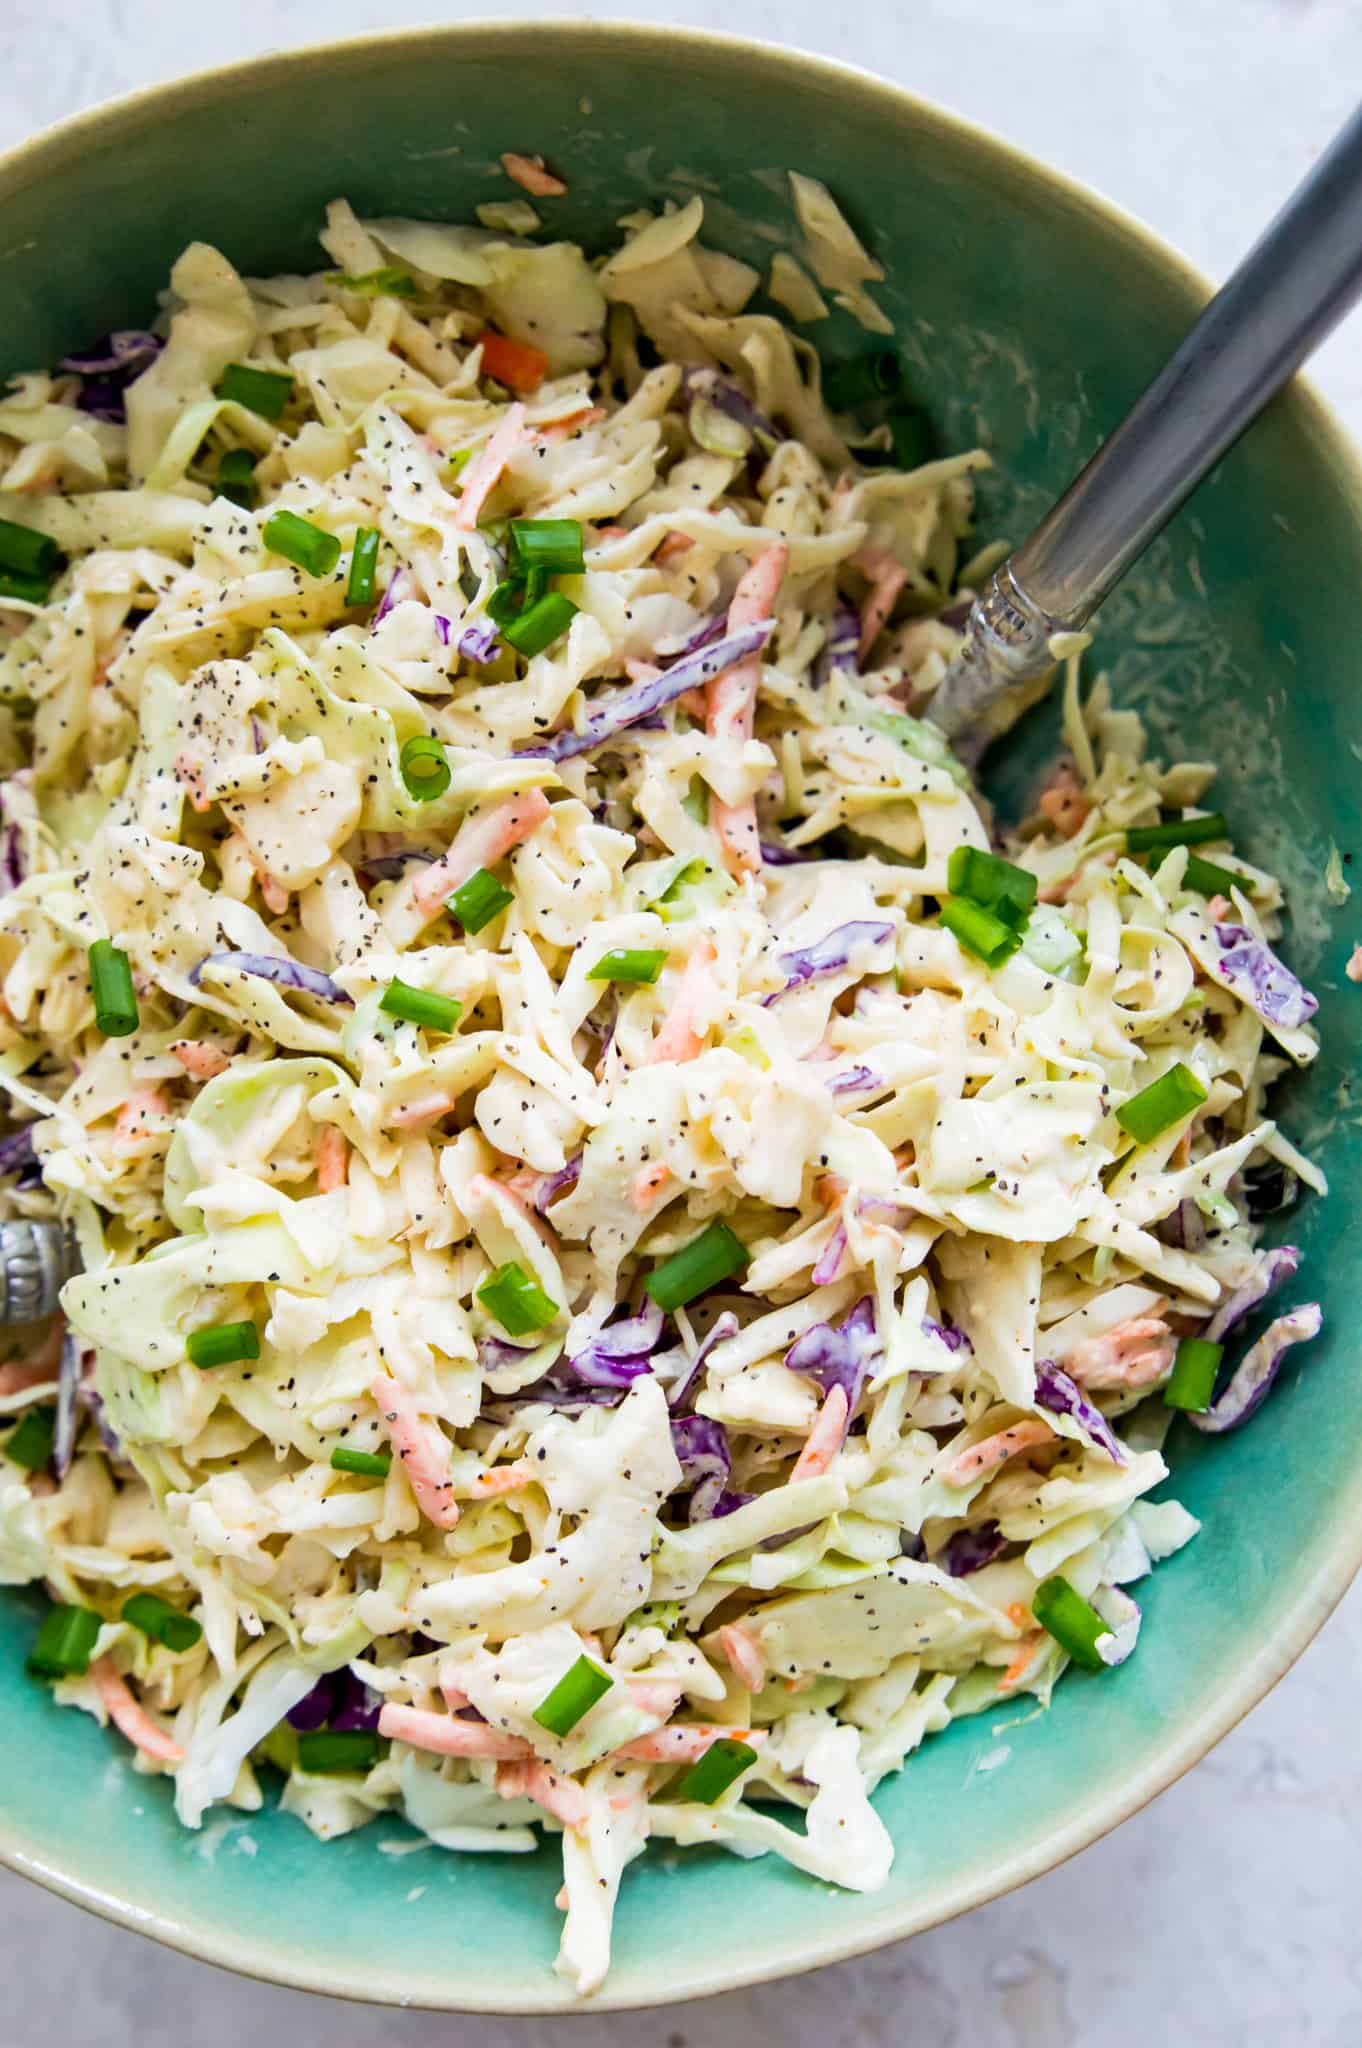 A bowl of coleslaw with a spoon in it.